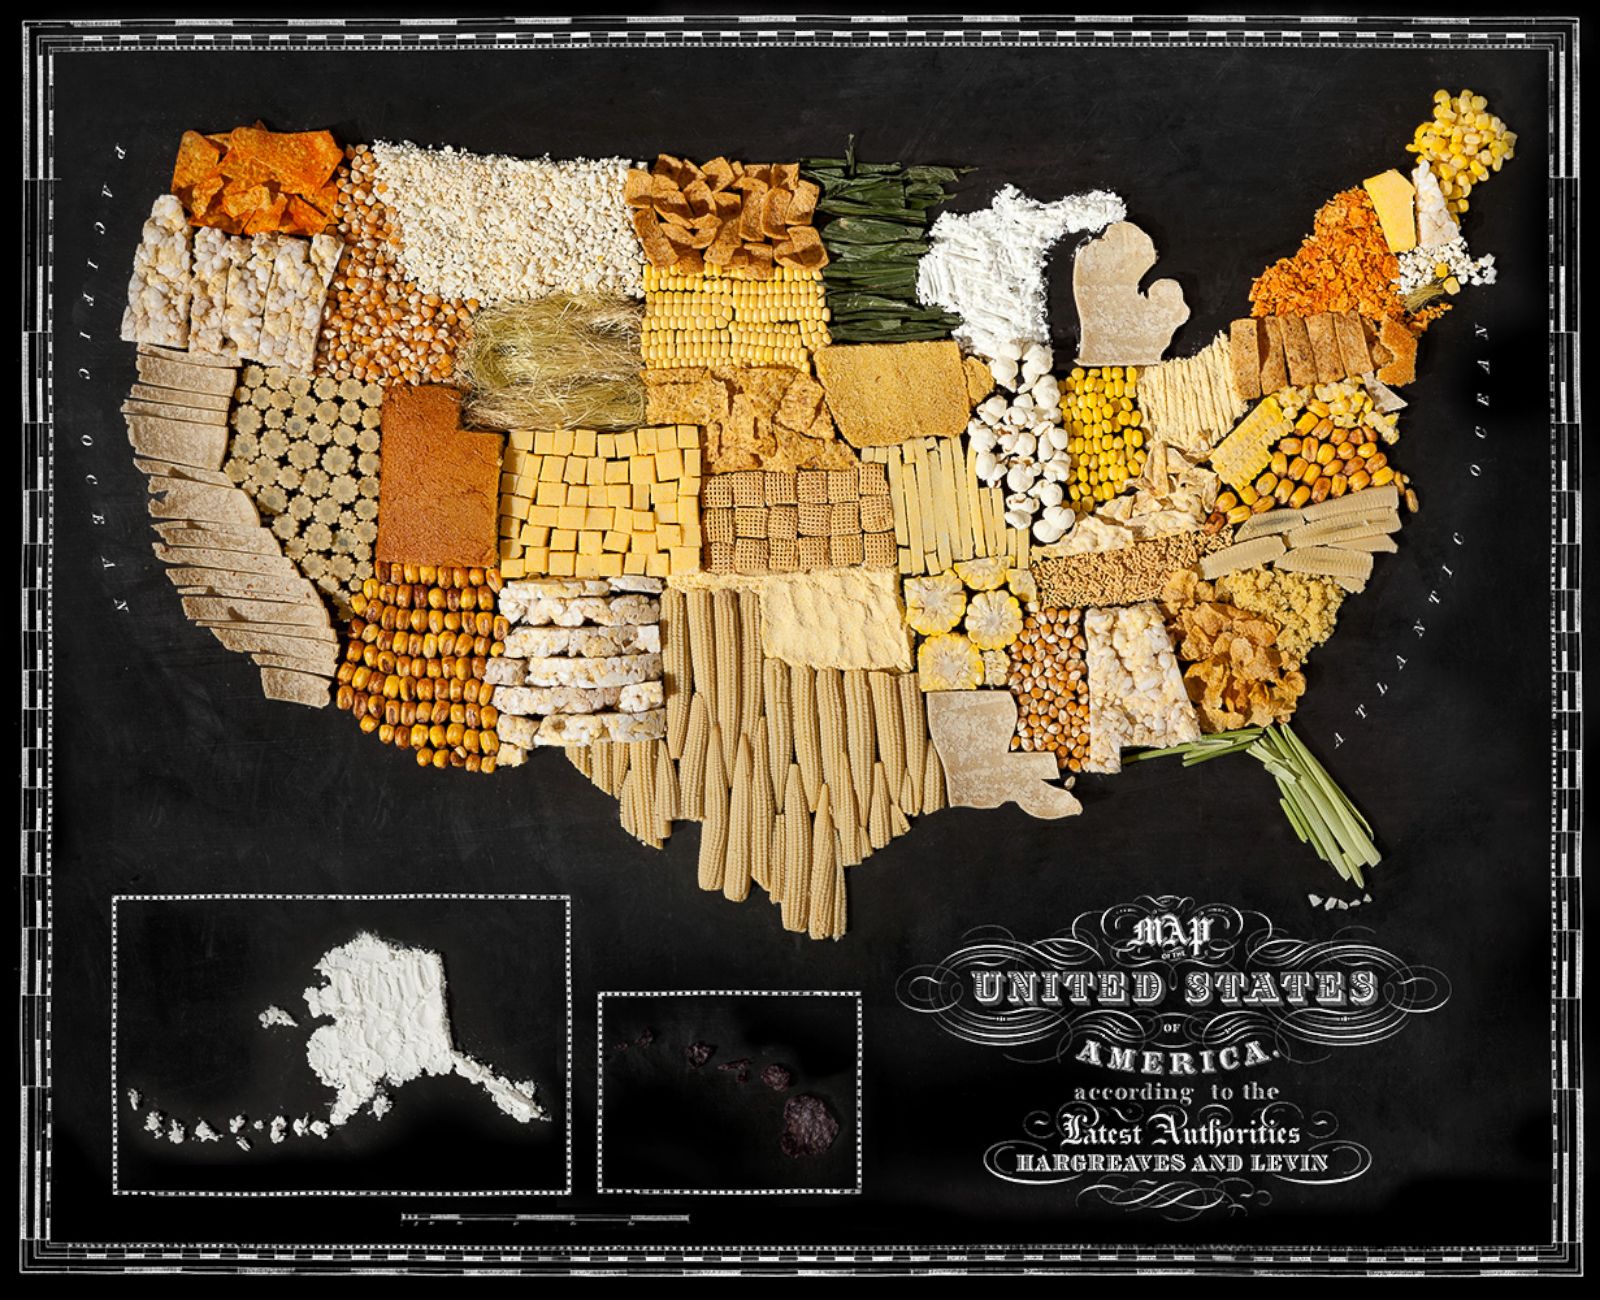 travel channel food map